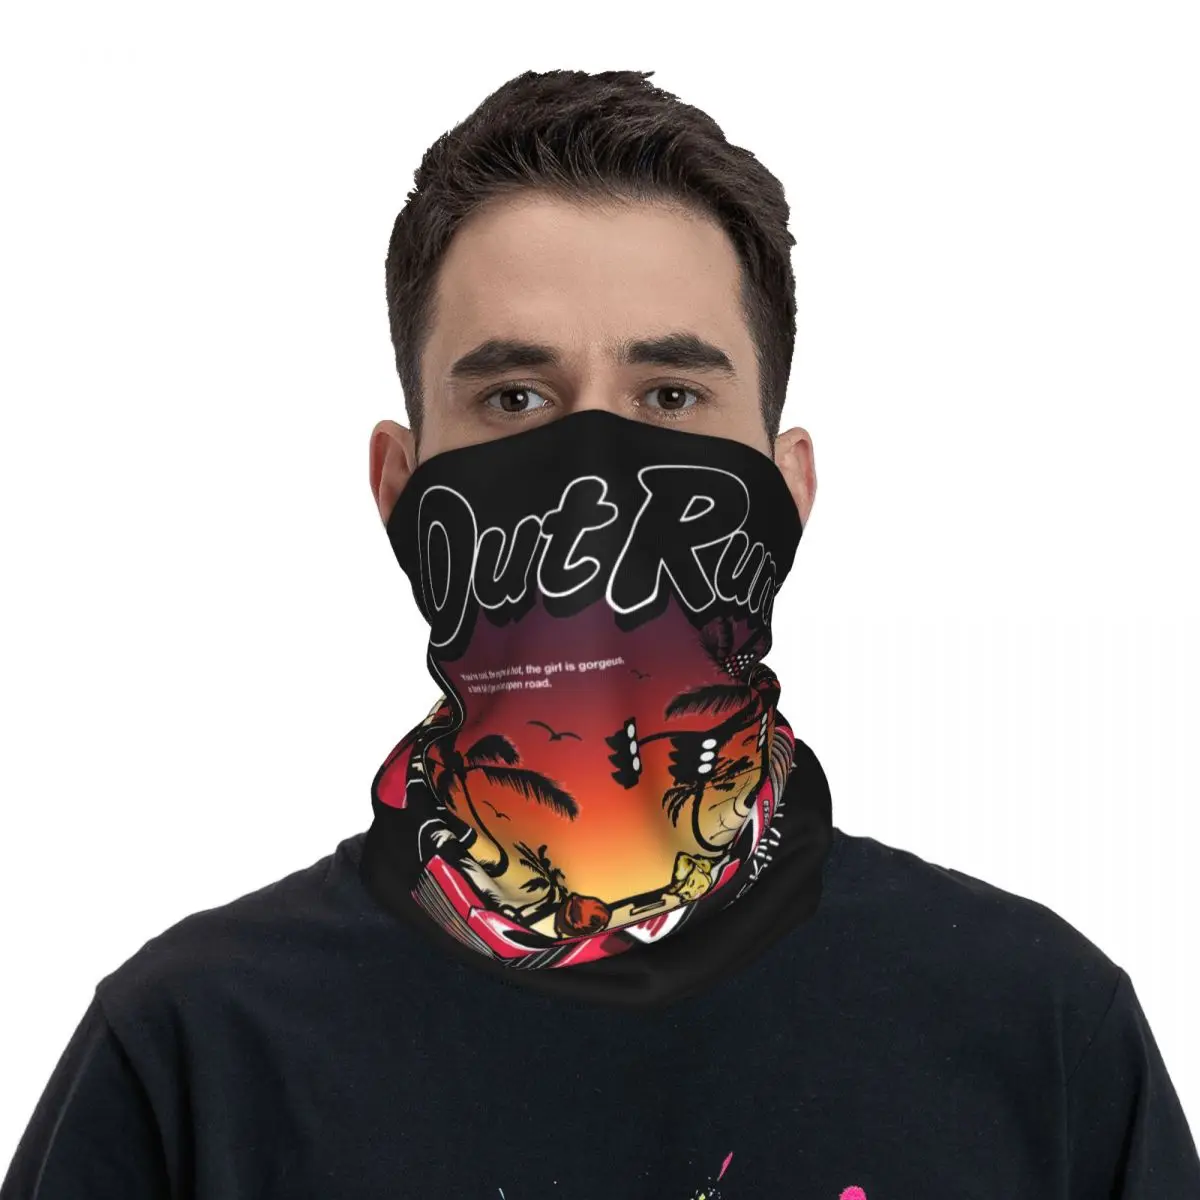 

Out Run 80s Retro Arcade Game Bandana Neck Gaiter Printed Wrap Scarf Balaclava Running Neck Cover for Men Women Adult Breathable